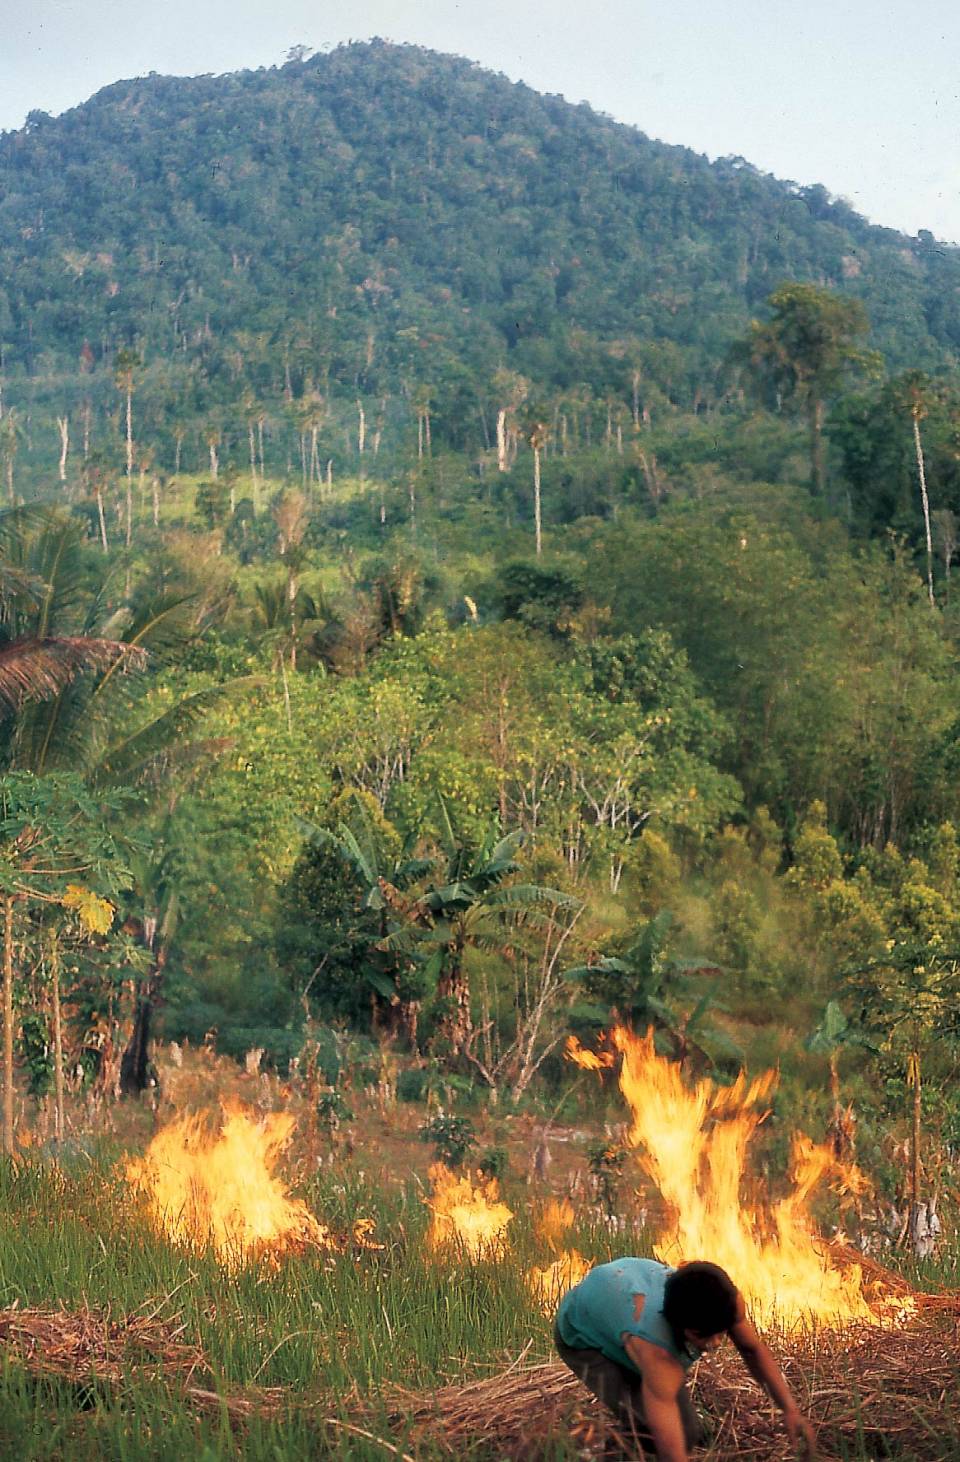 Deforestation is largely responsible for two of the four novel viruses to emerge in the past 50 years: Ebola and SARS. Part of preventing the next global pandemic is creating economic incentives to end practices like the slash-and-burn deforestation seen here, argue a team of researchers in the current issue of Science.

Photo by Margaret Kinnaird, WWF International